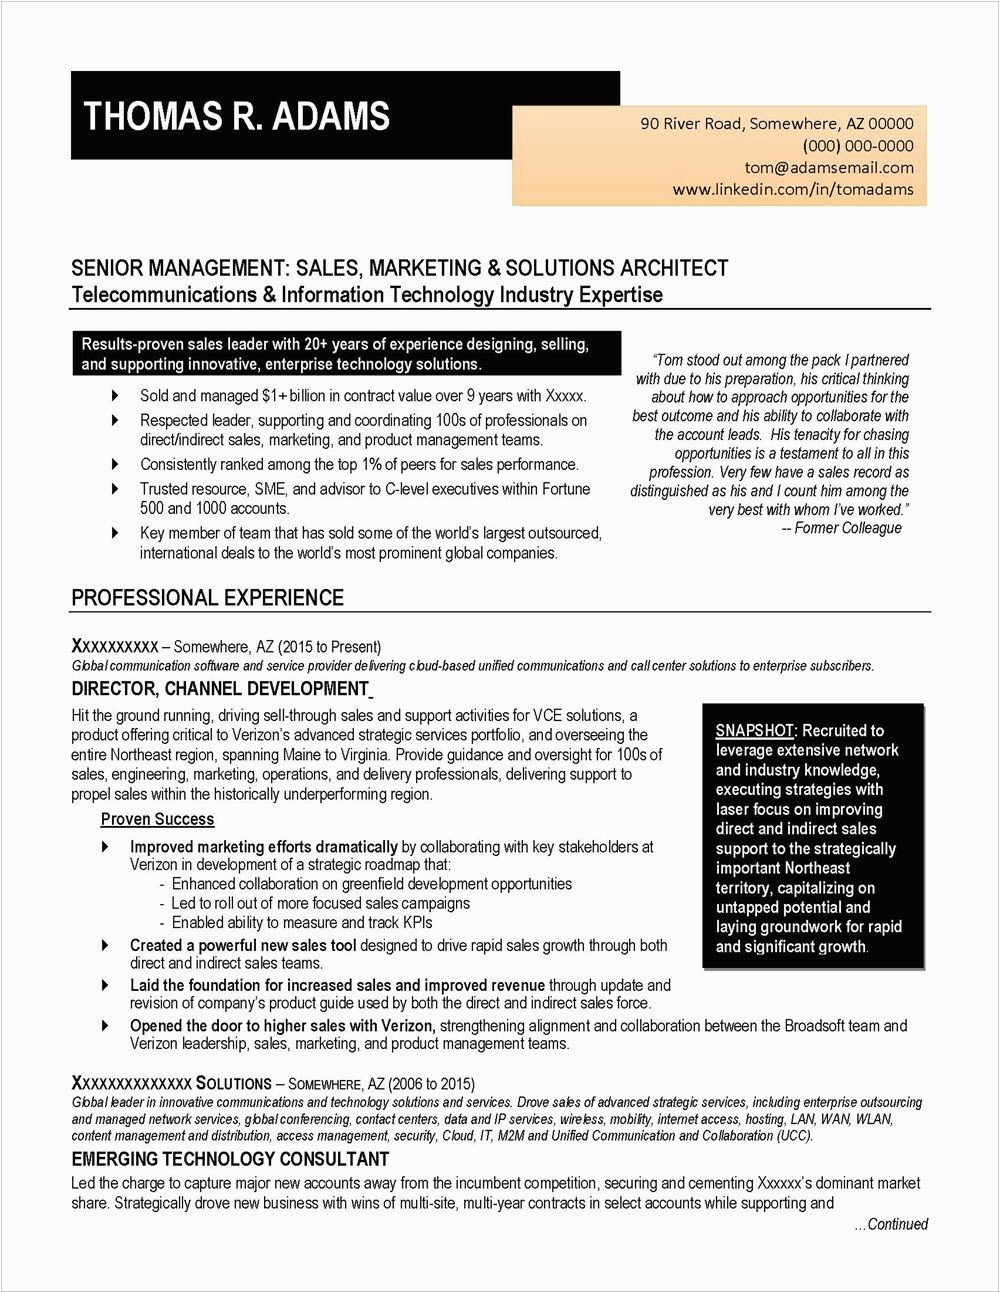 Sample Resume for A Sale Manager Telecomunication Example Of Resume Written for A Tele Munications Industry Sales